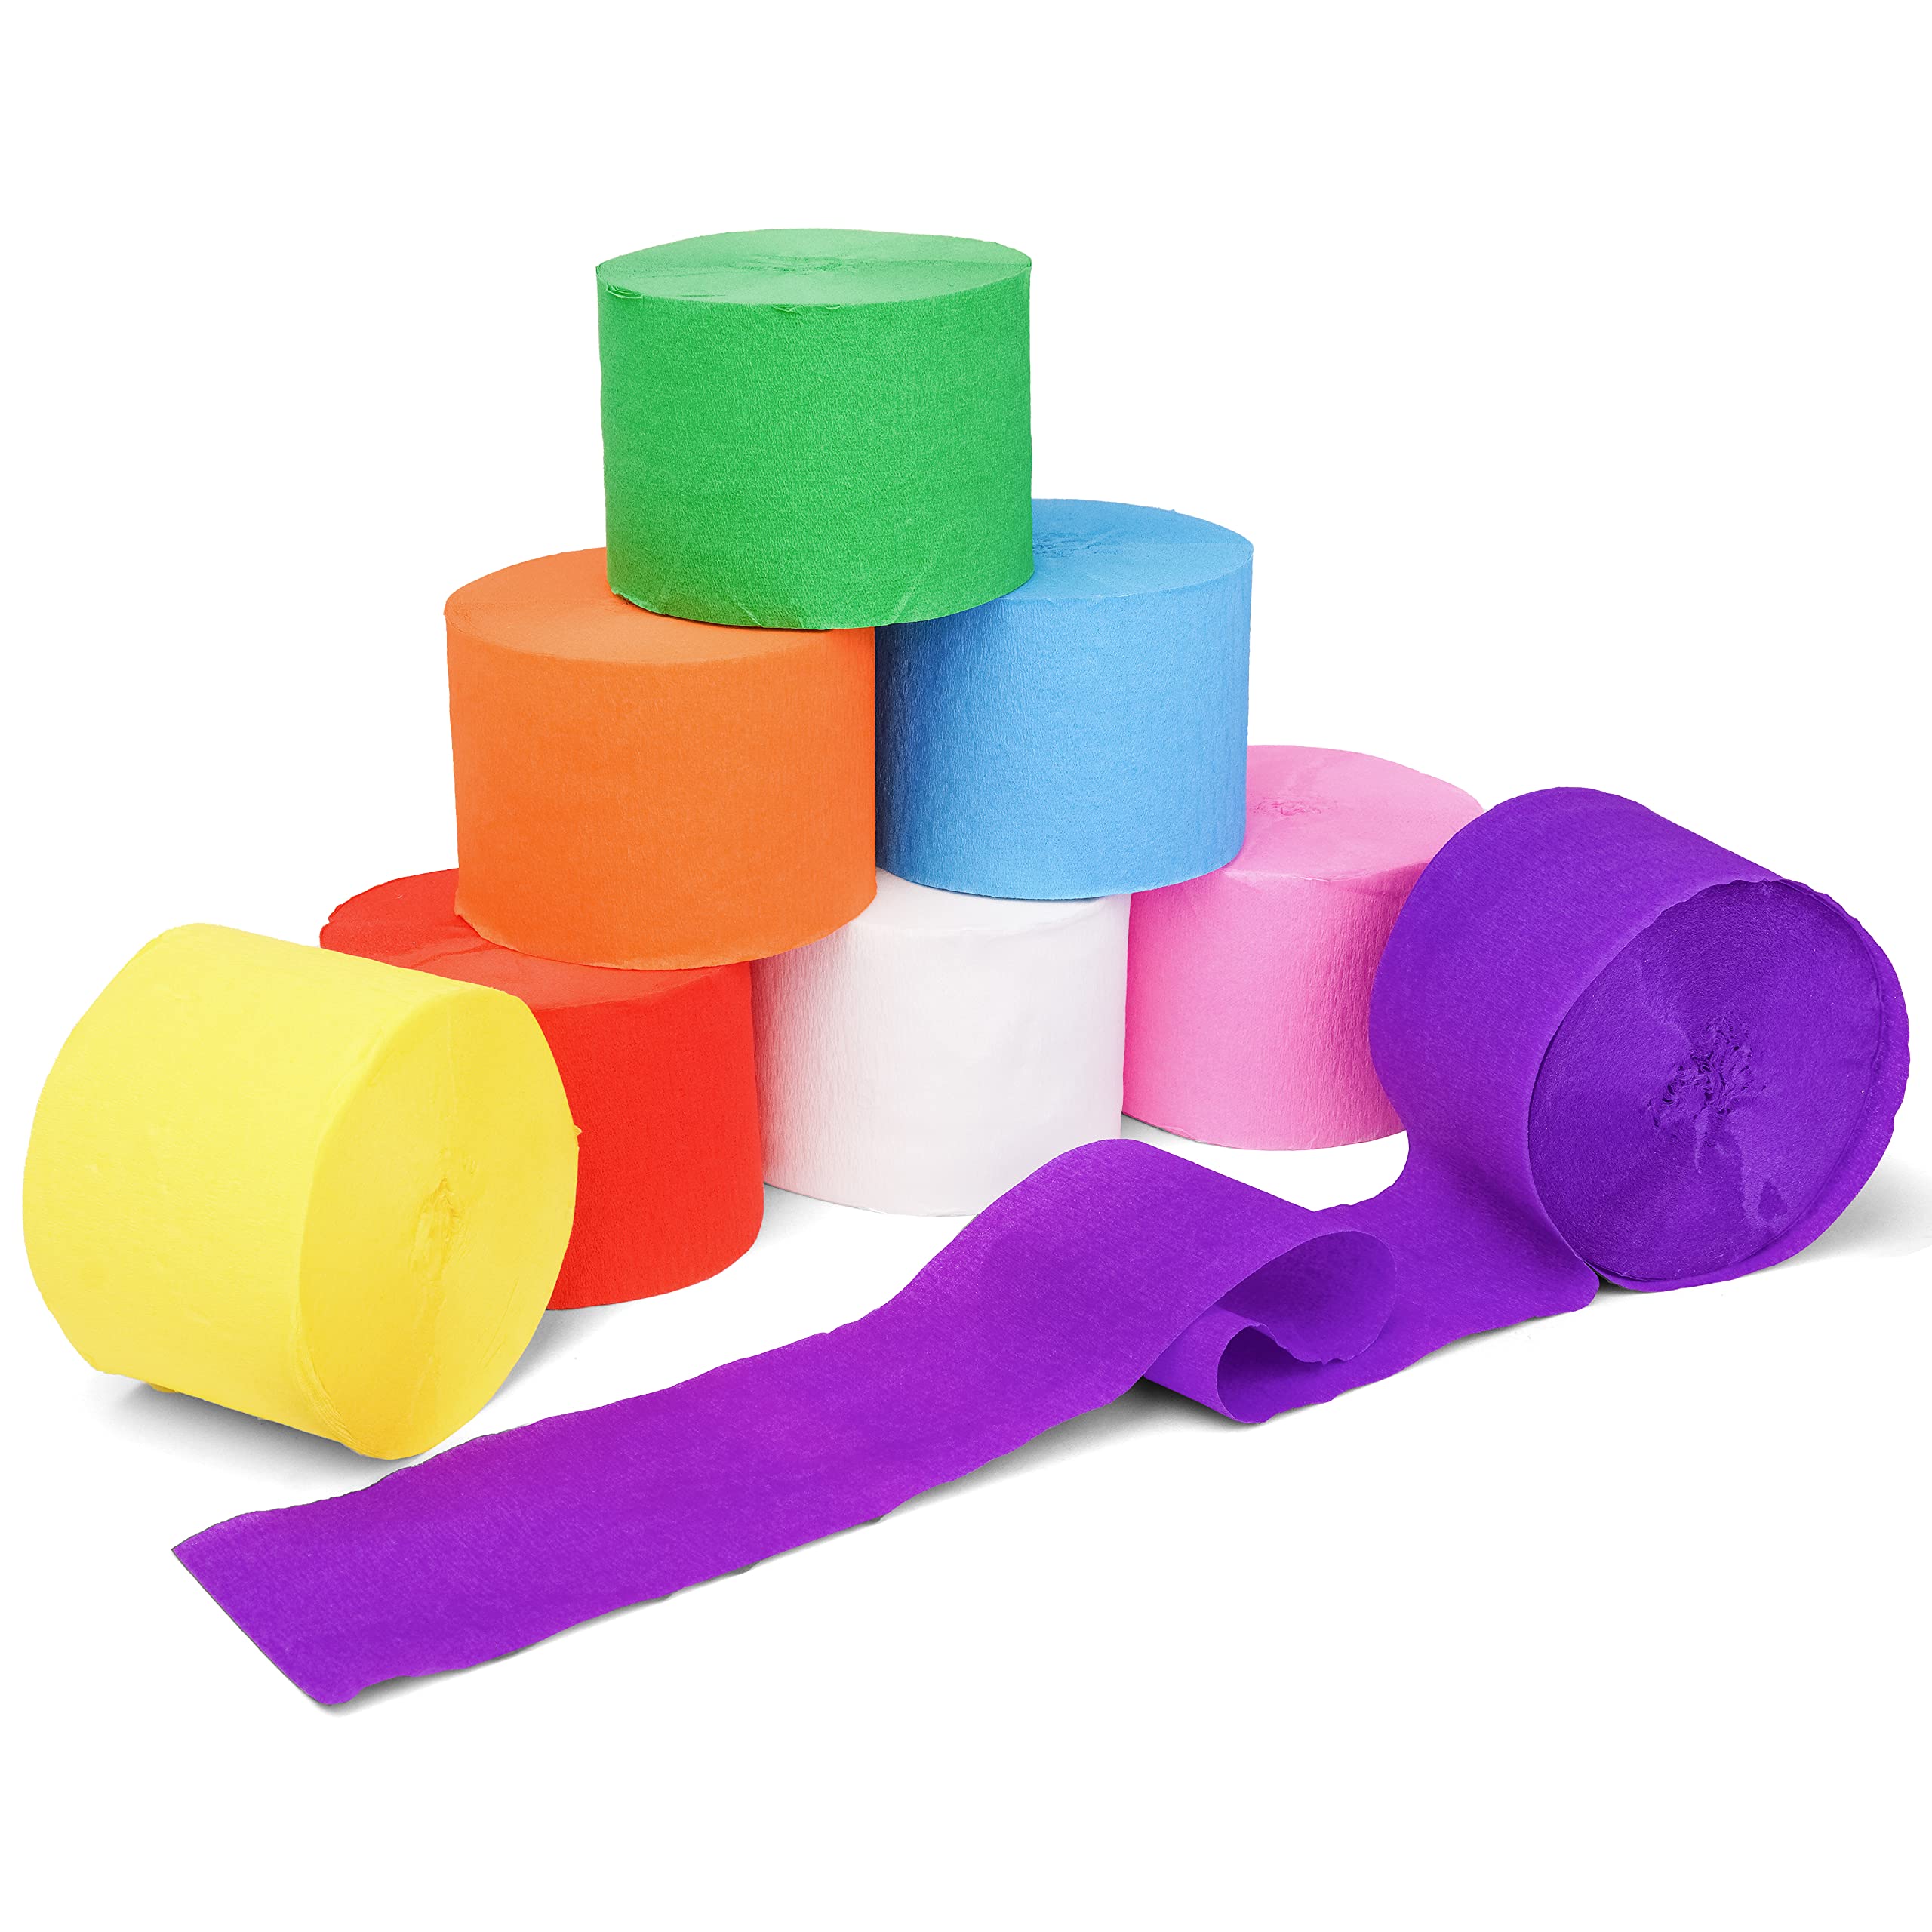  Crepe Paper Streamers (656ft x 1.8inch) - 8 Rolls & 8